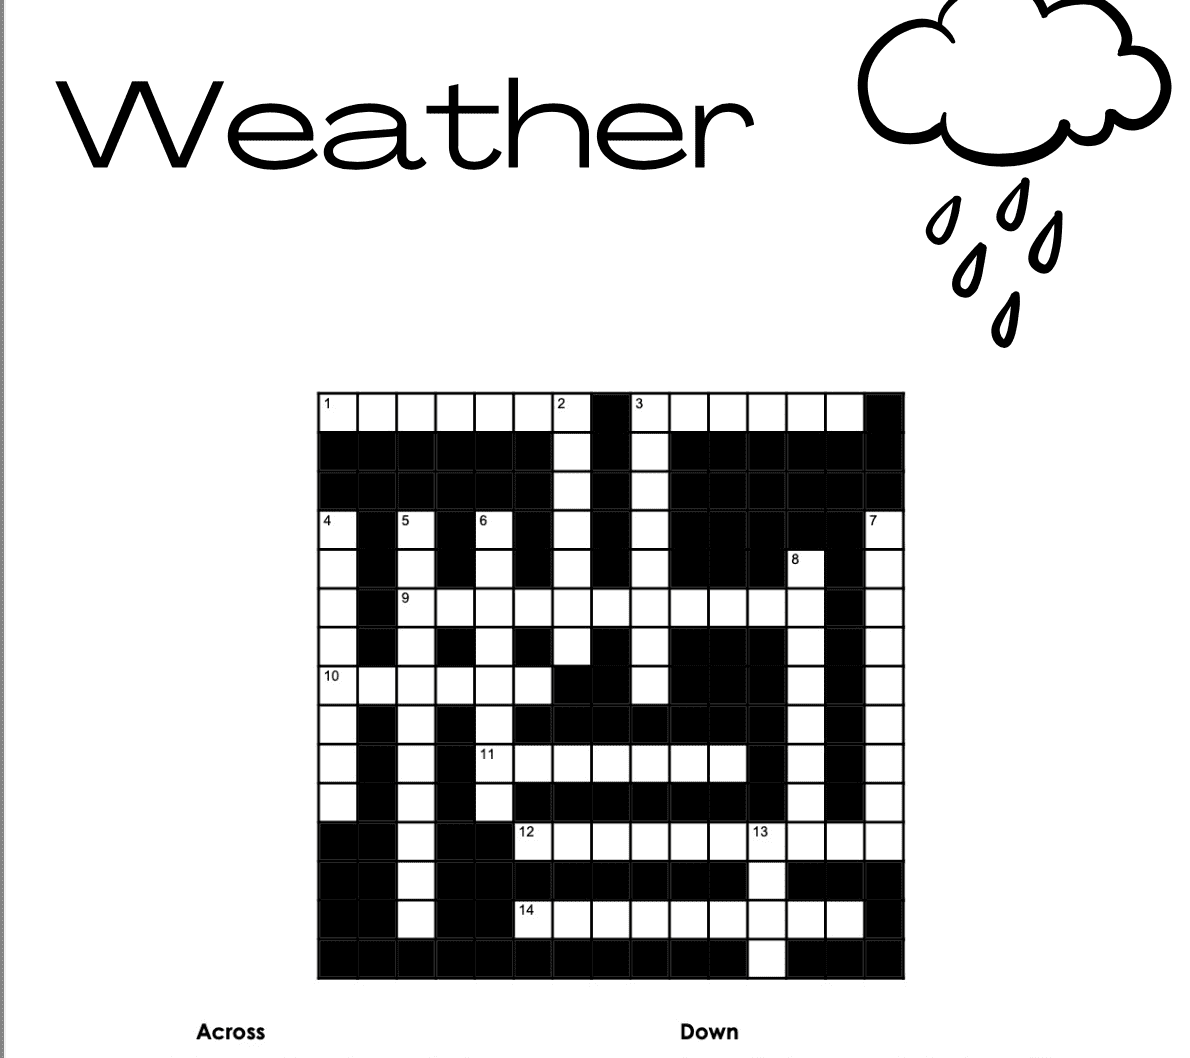 Weather-themed crossword puzzle with clues.